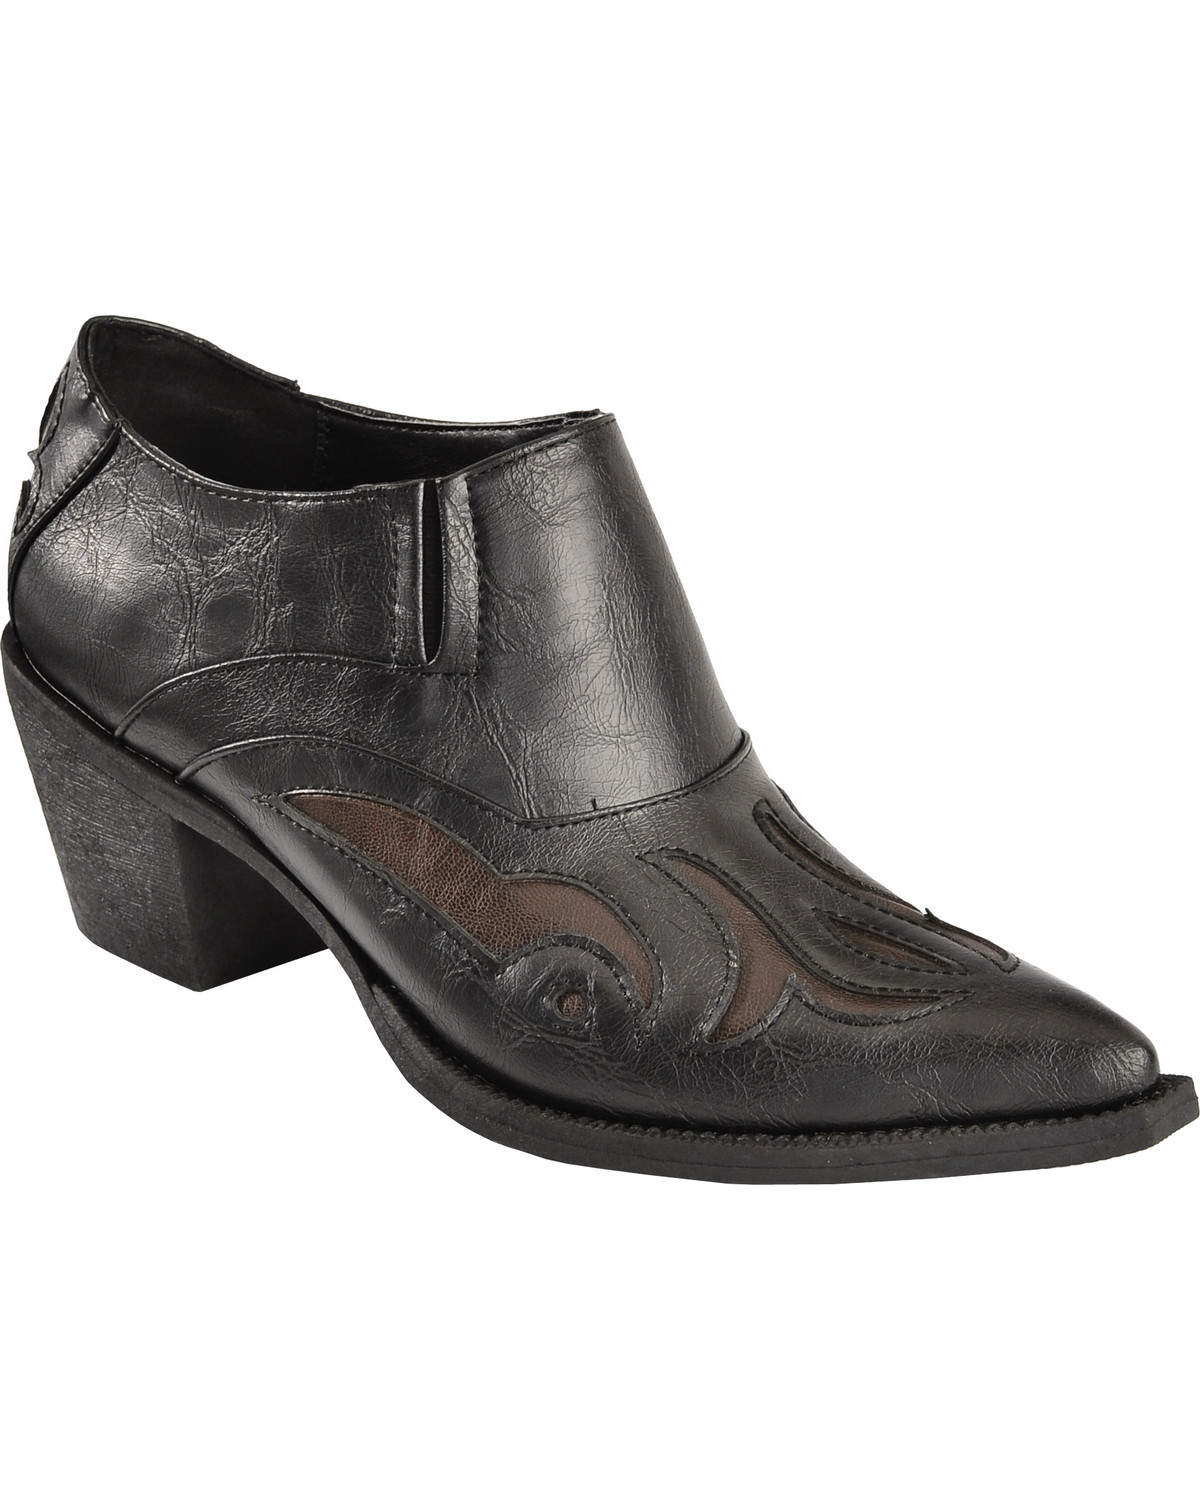 Roper Women's Inlay Ankle Boots - Pointed Toe